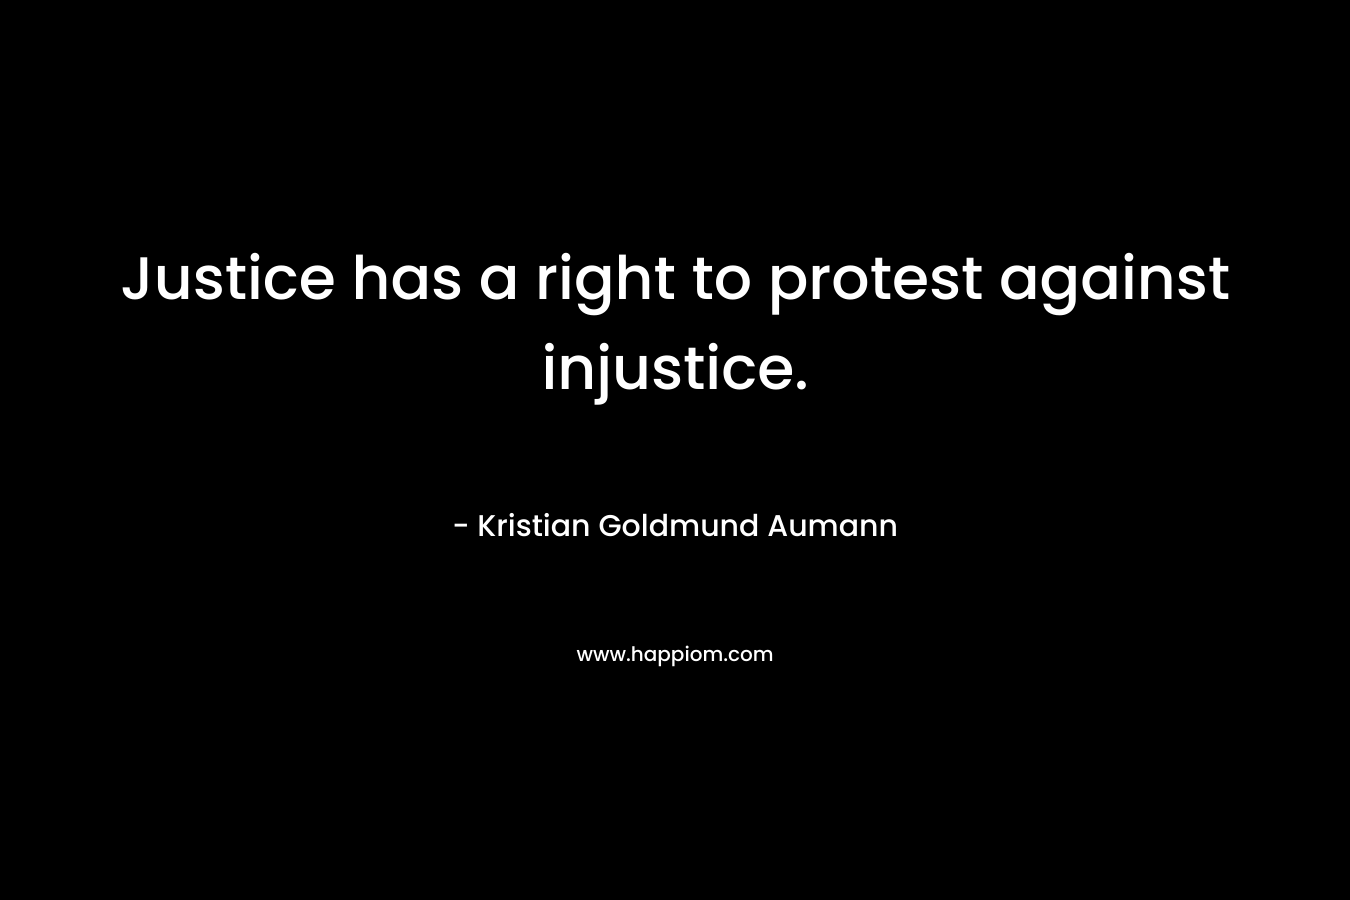 Justice has a right to protest against injustice.